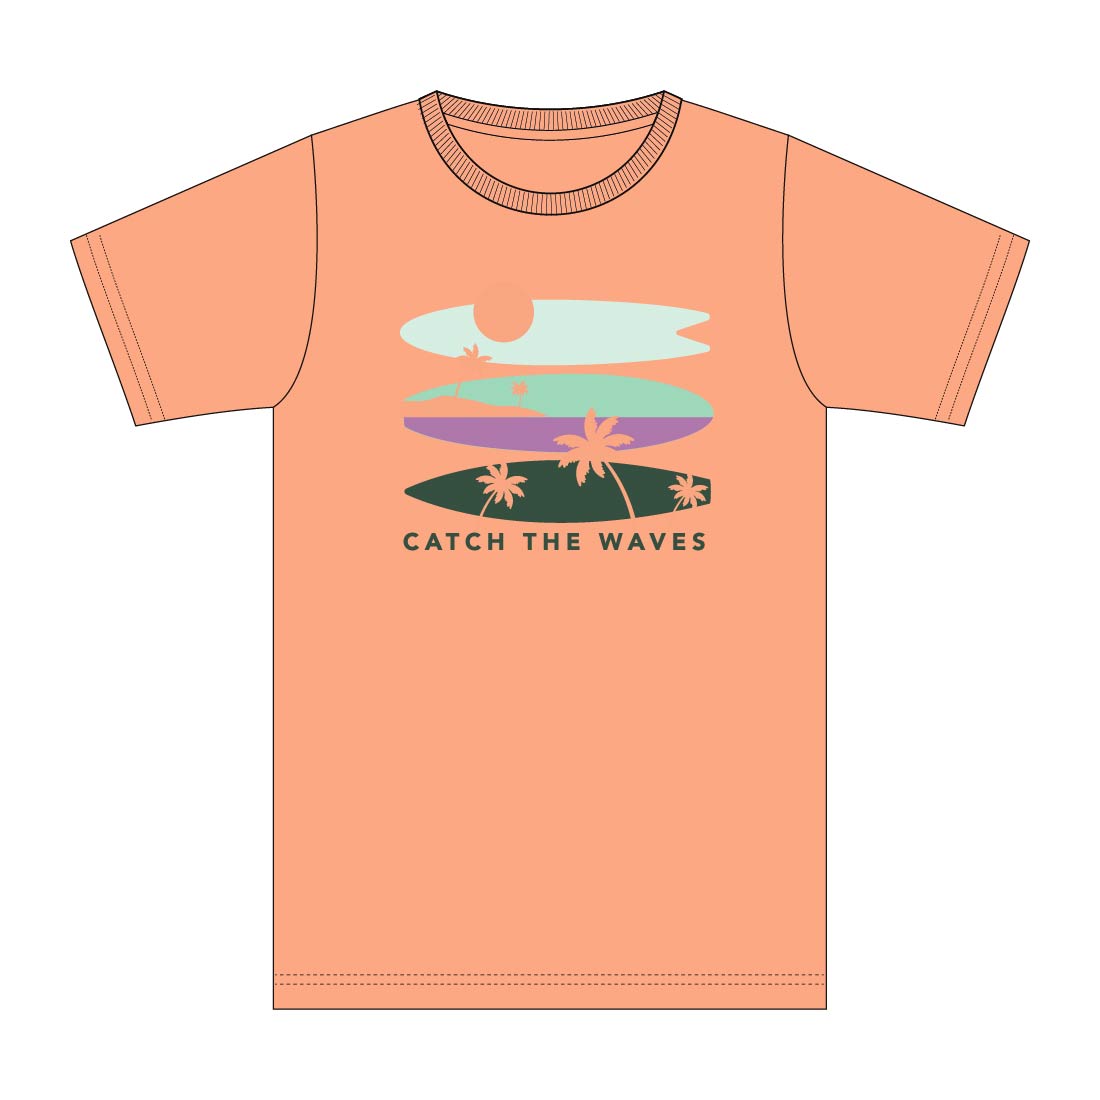 CATCH THE WAVES_T-SHIRT DESIGN REAL SIZE FOR 8 YEARS preview image.